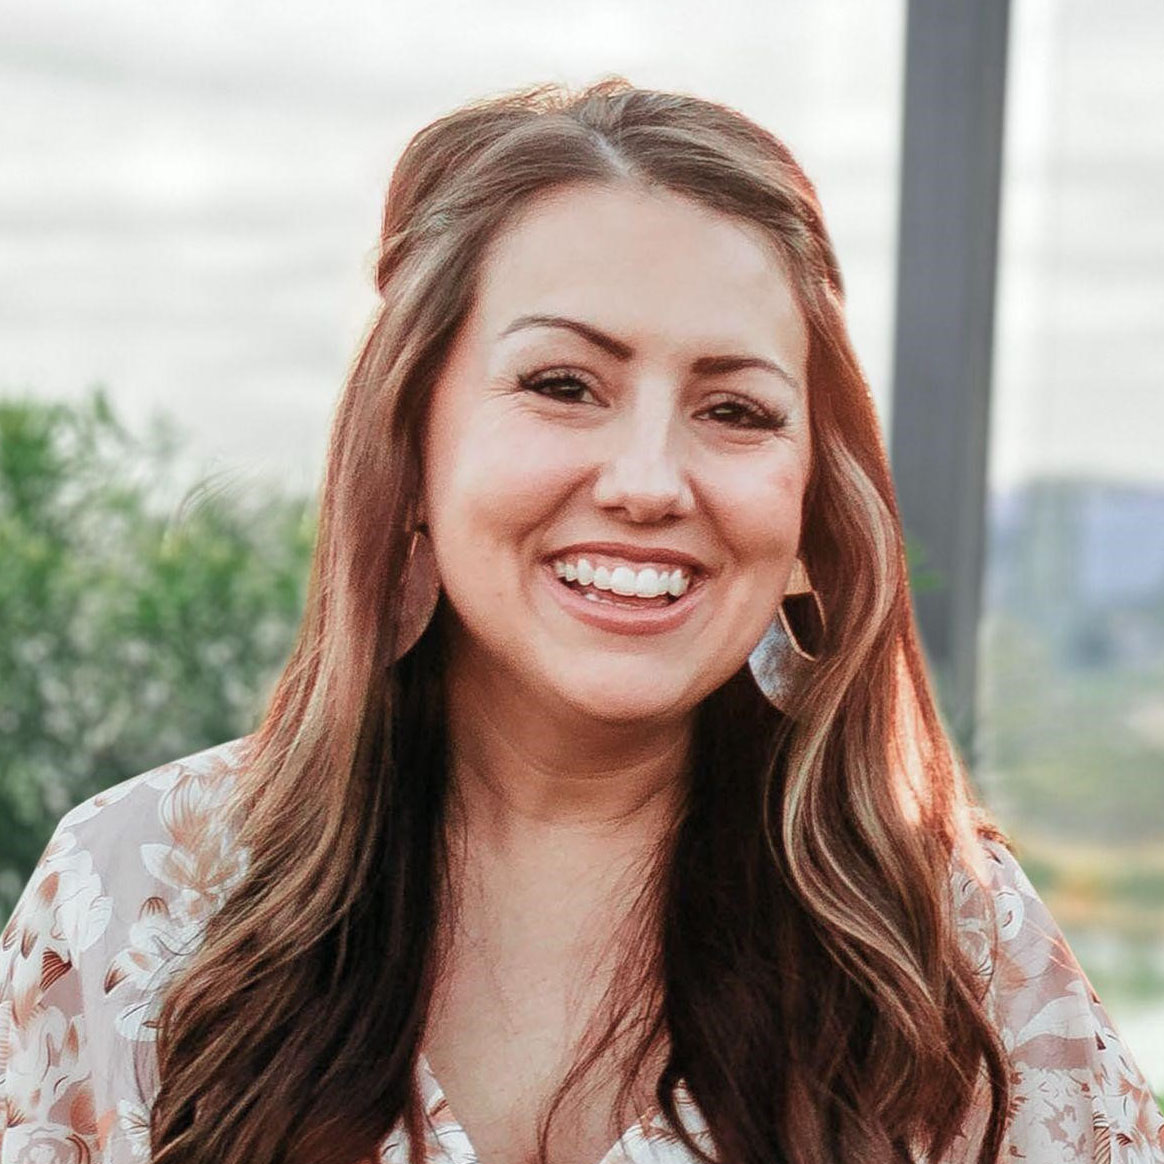 Kathryn Little, wearing a floral blouse, smiling.